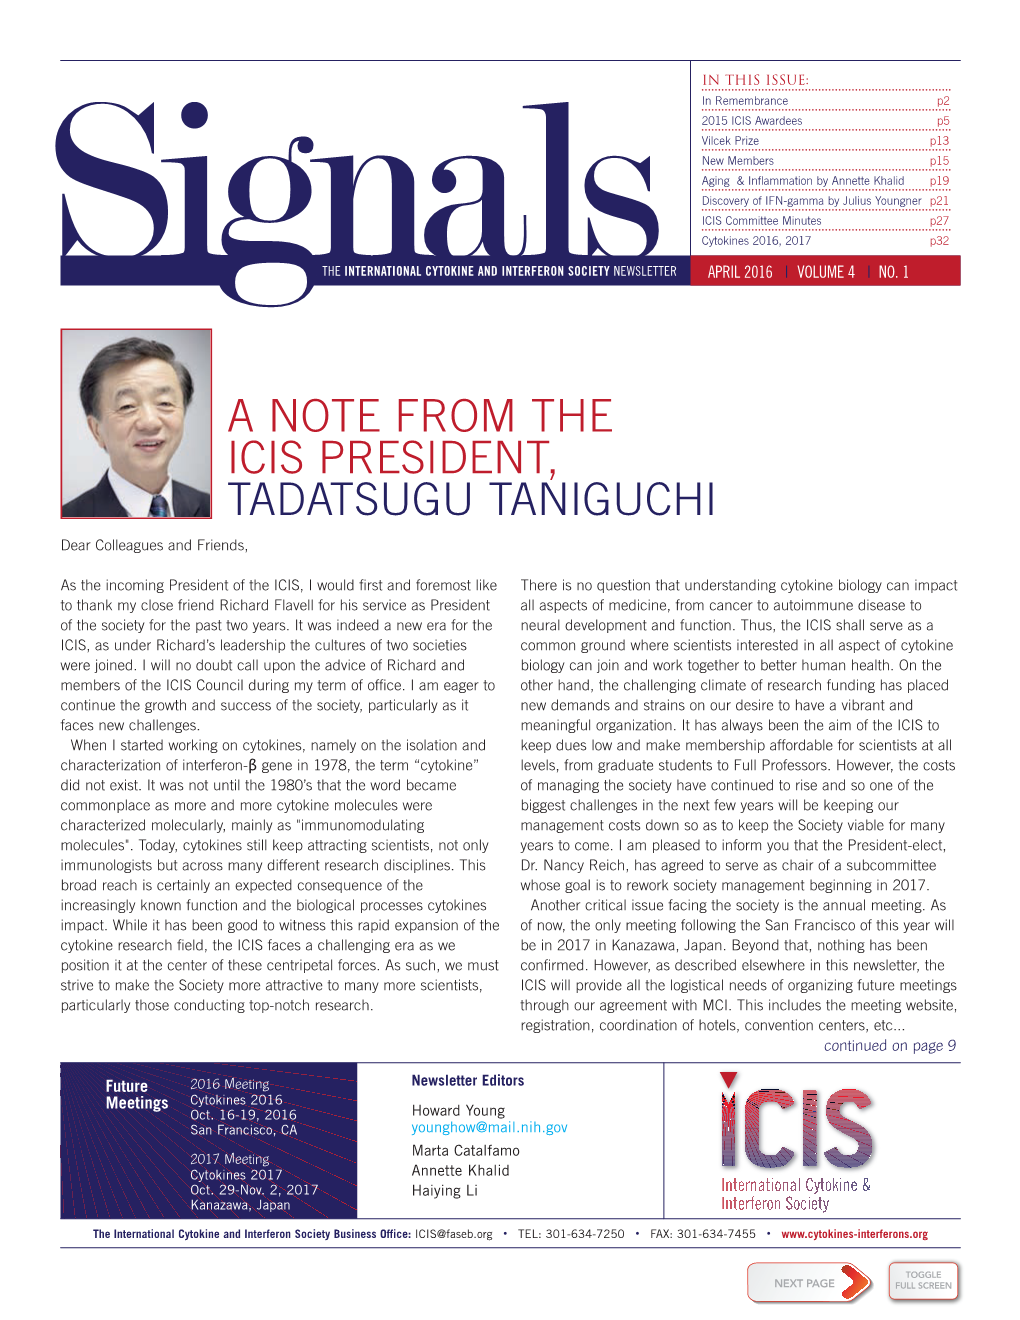 A NOTE from the ICIS PRESIDENT, TADATSUGU TANIGUCHI Dear Colleagues and Friends